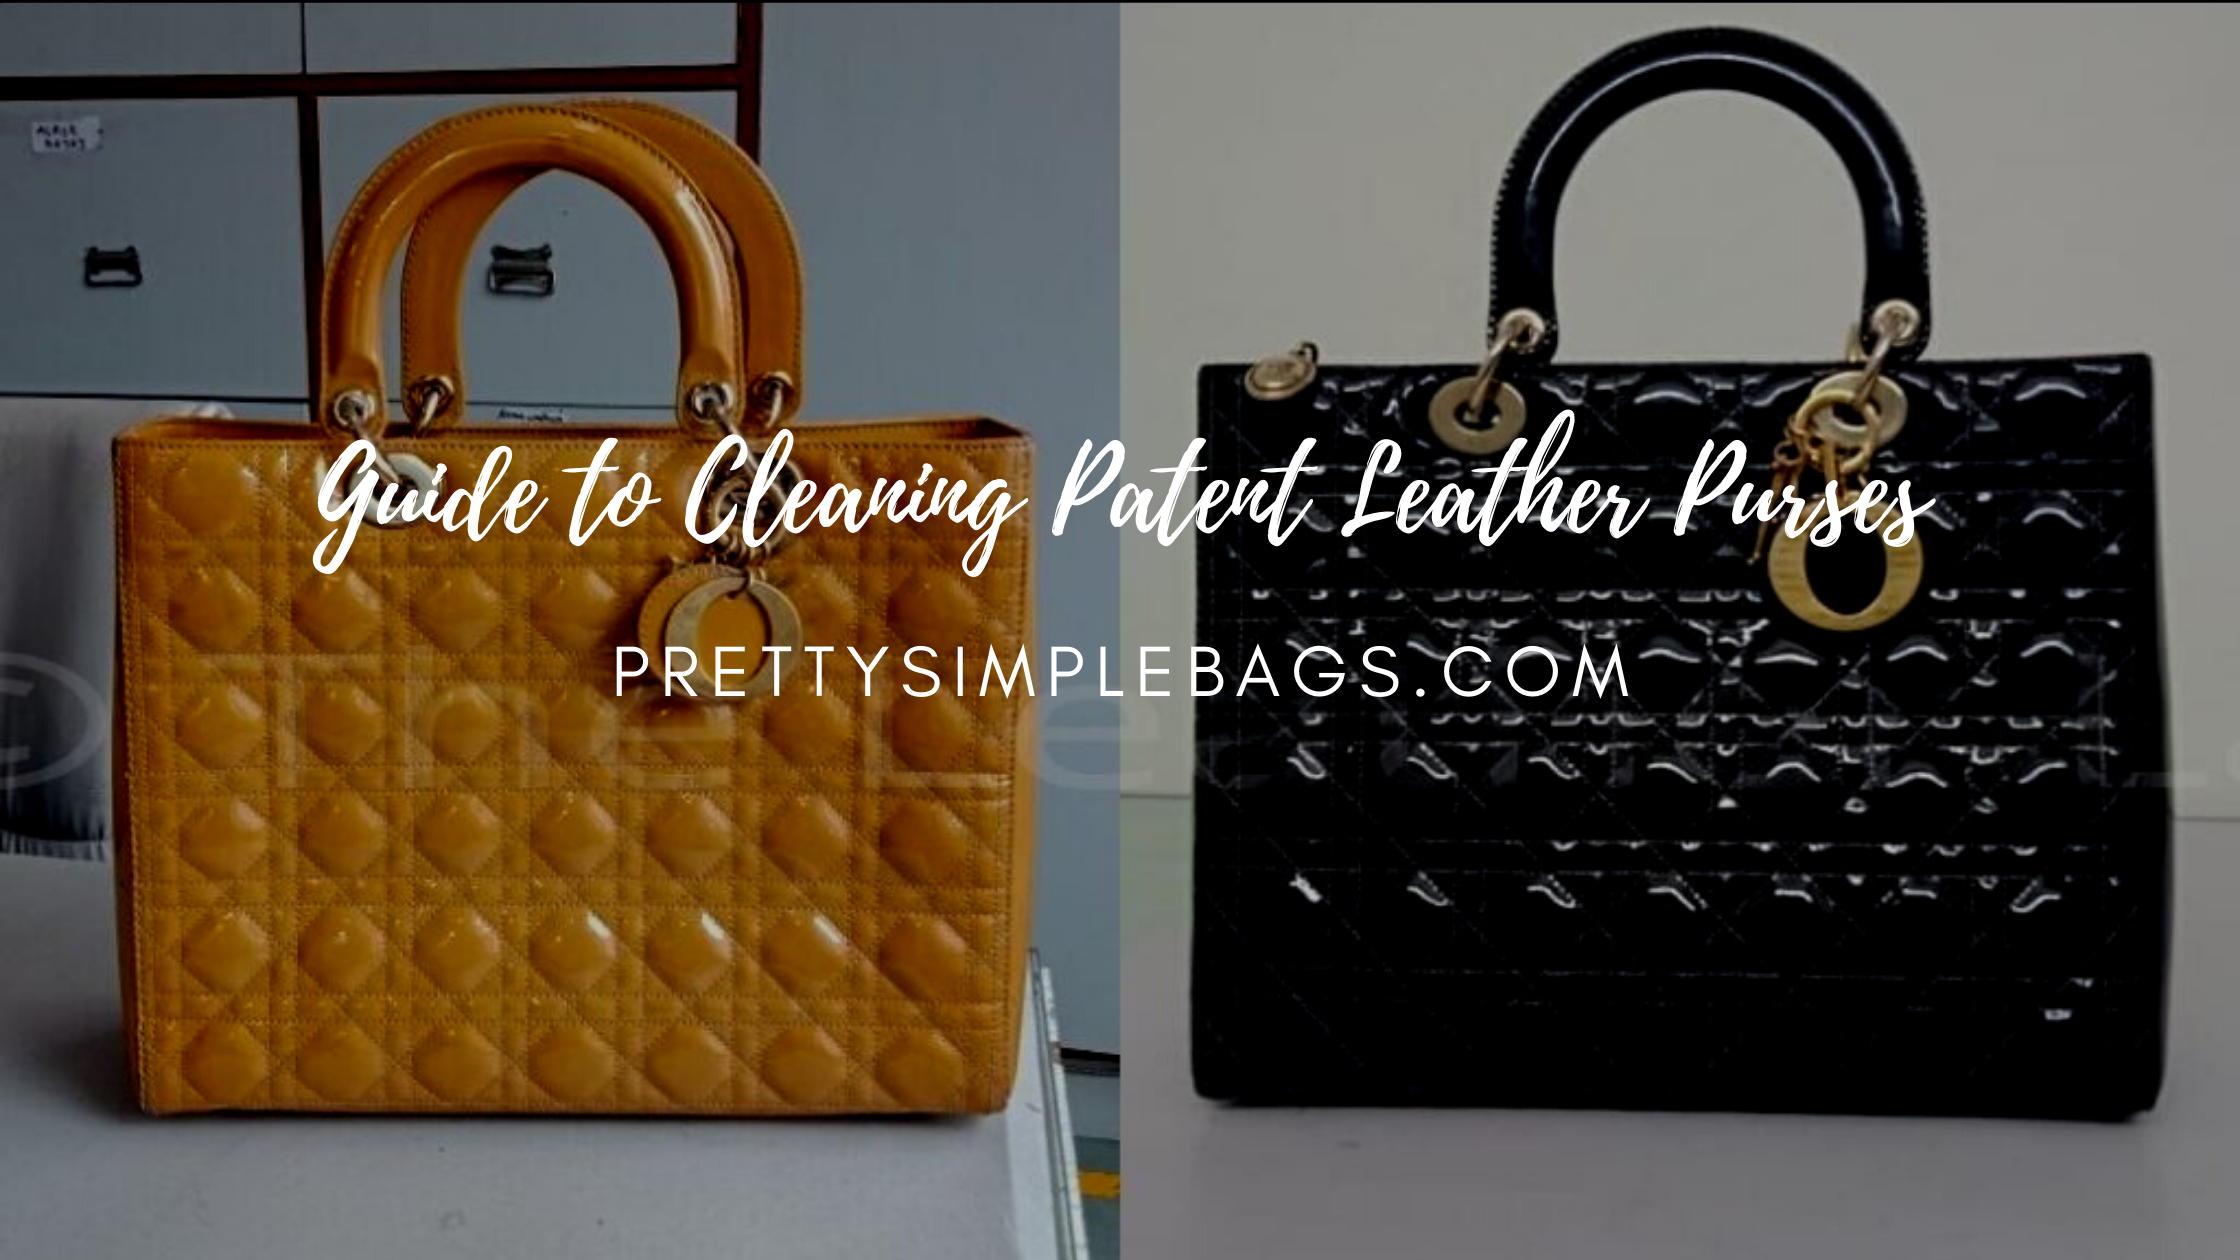 cleaning patent leather purses